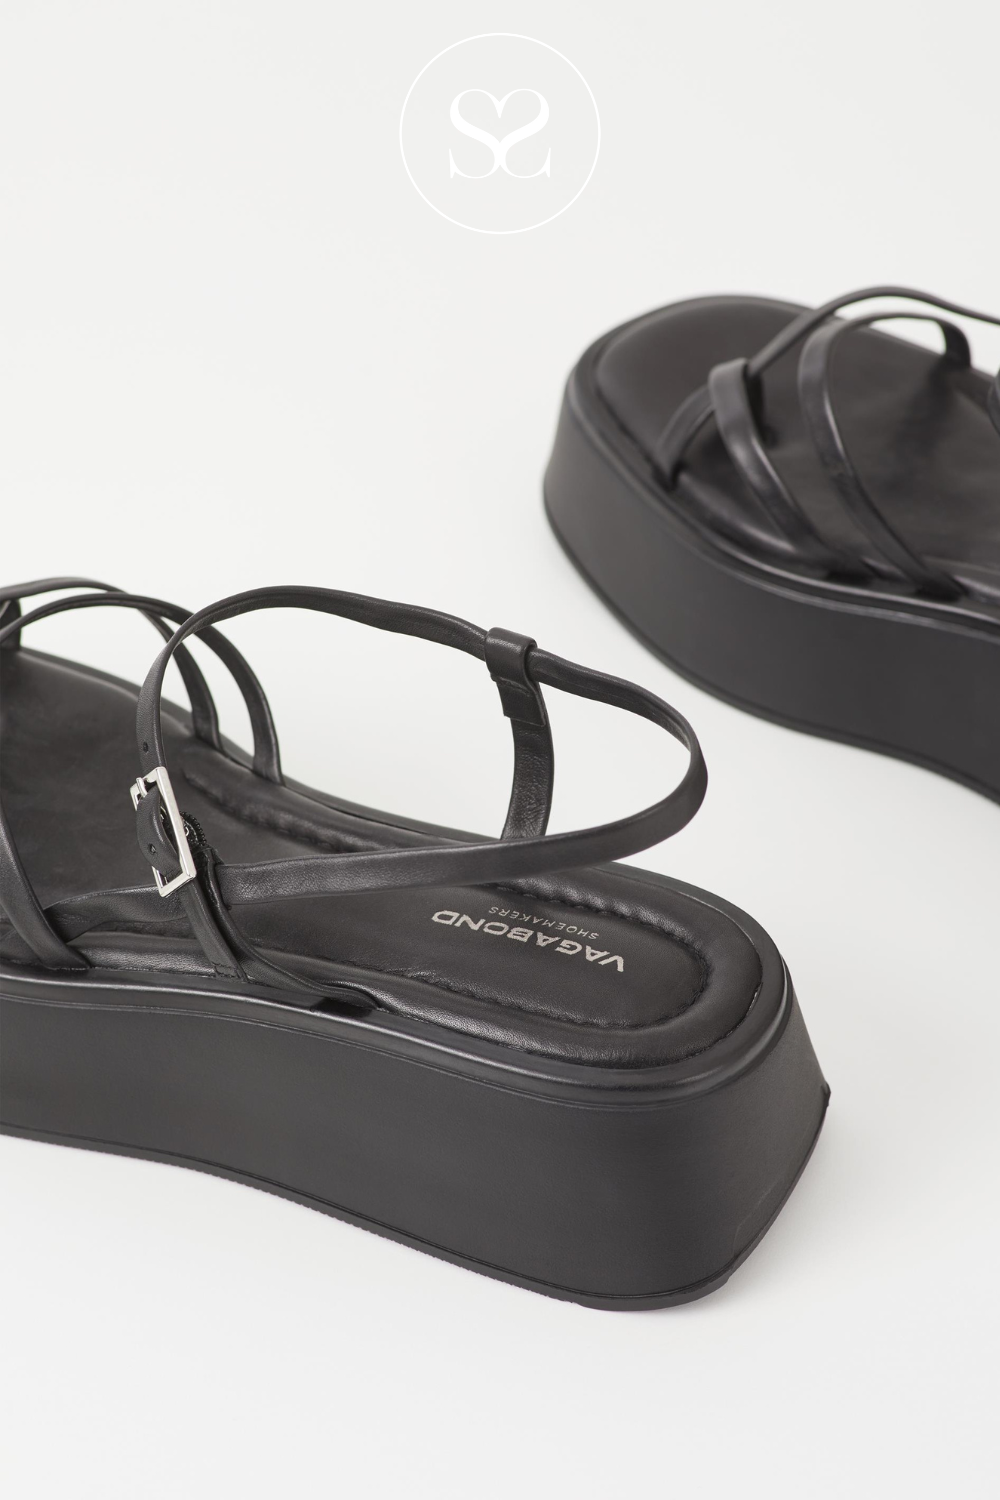 VAGABOND COURTNEY BLACK LEATHER CHUNKY FLATFORM SANDALS WITH DELICATE THIN ADJUSTABLE STRAPS